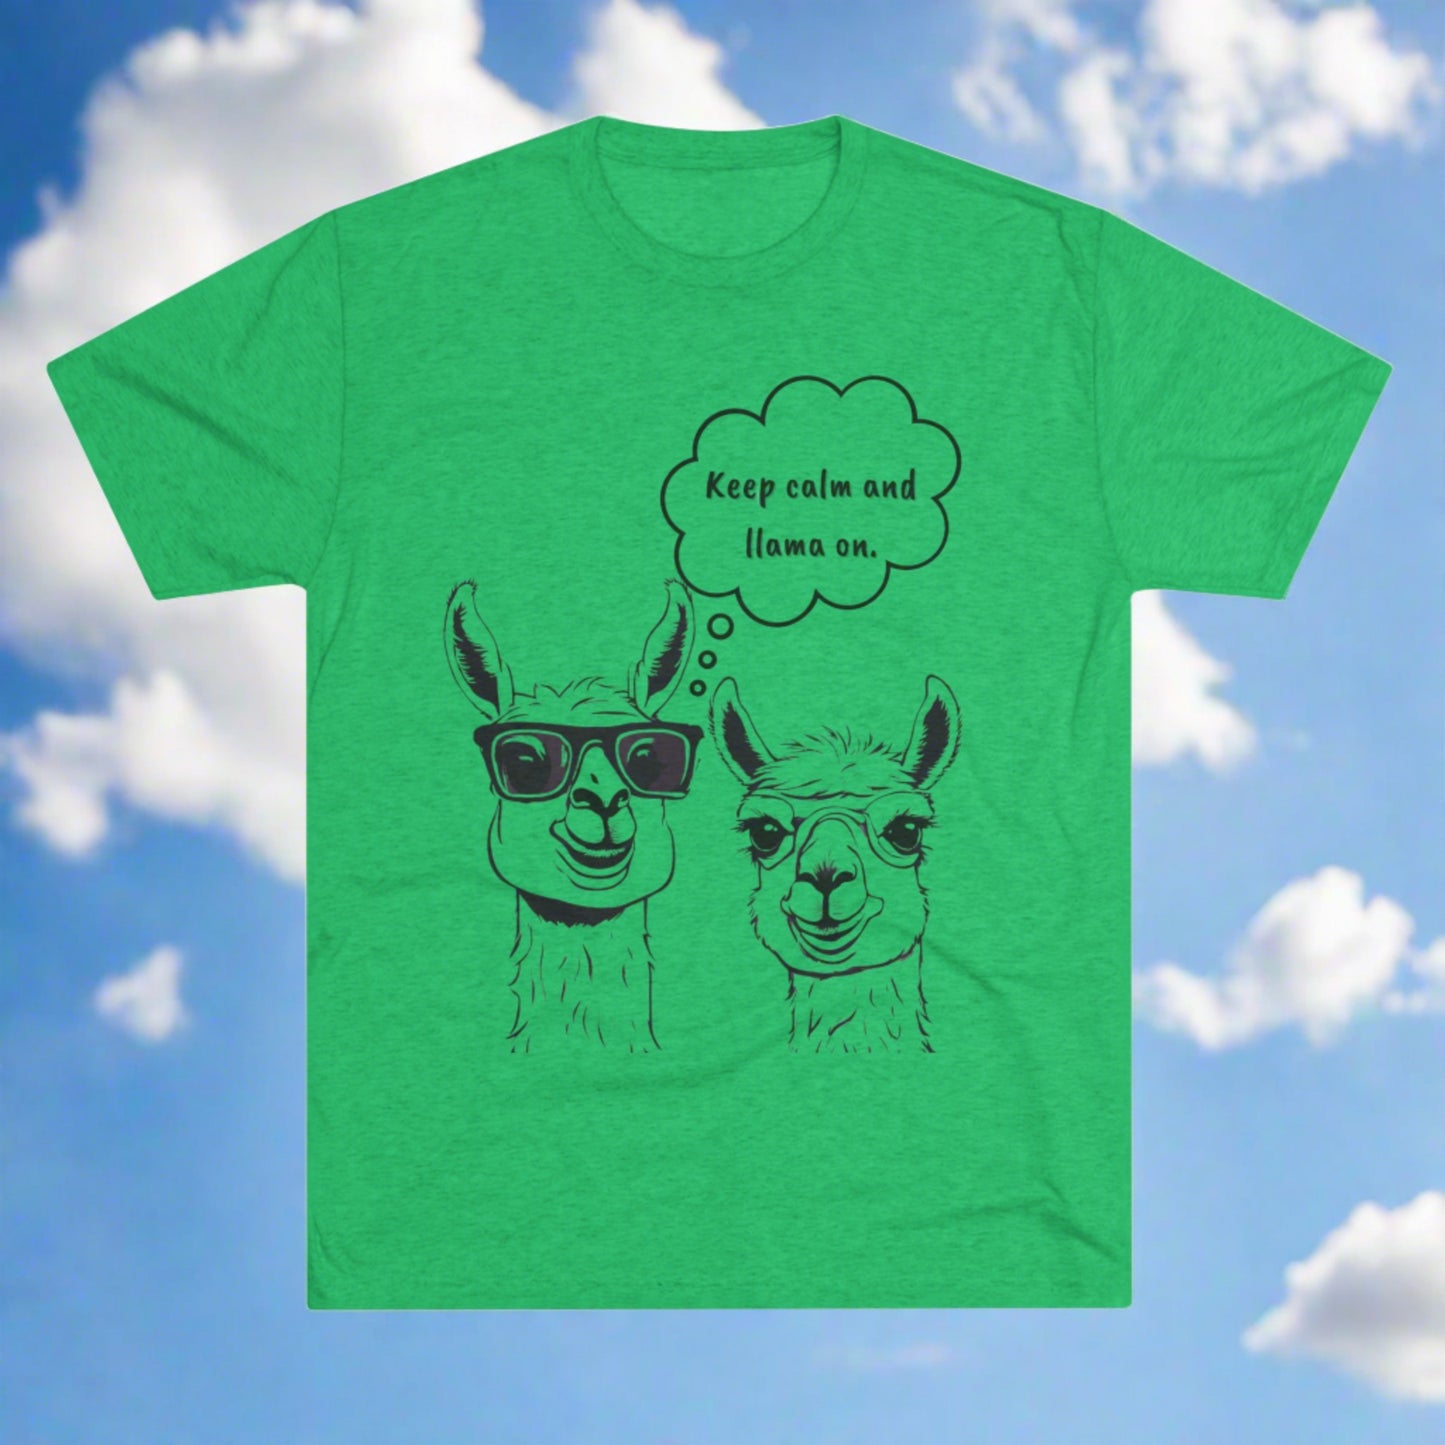 A green, breathable fabric T-shirt featuring a cartoon drawing of two llamas. The llama on the left is wearing sunglasses, and the llama on the right has a blank expression. A thought bubble above the llamas reads, "Keep calm and llama on." This Printify Keep Calm and Llama On - Tri-Blend Crew Tee - Unisex Fit adds a fun twist to your wardrobe.